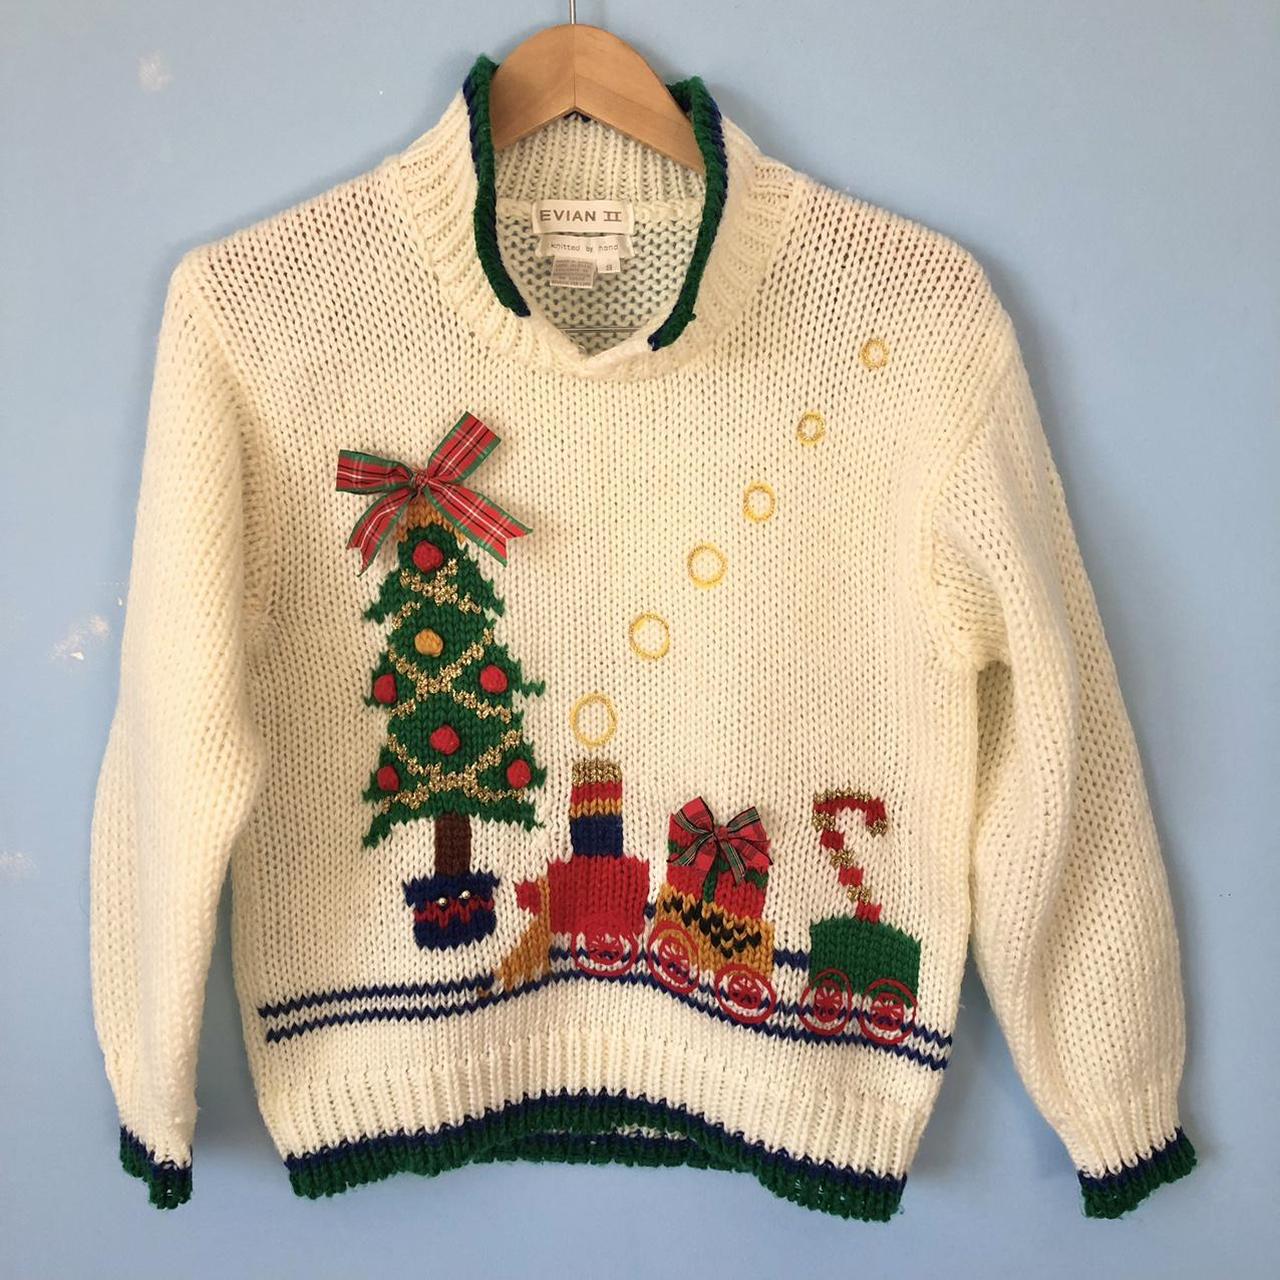 Ugly dodgers Christmas sweater. Wore quite a bit - Depop